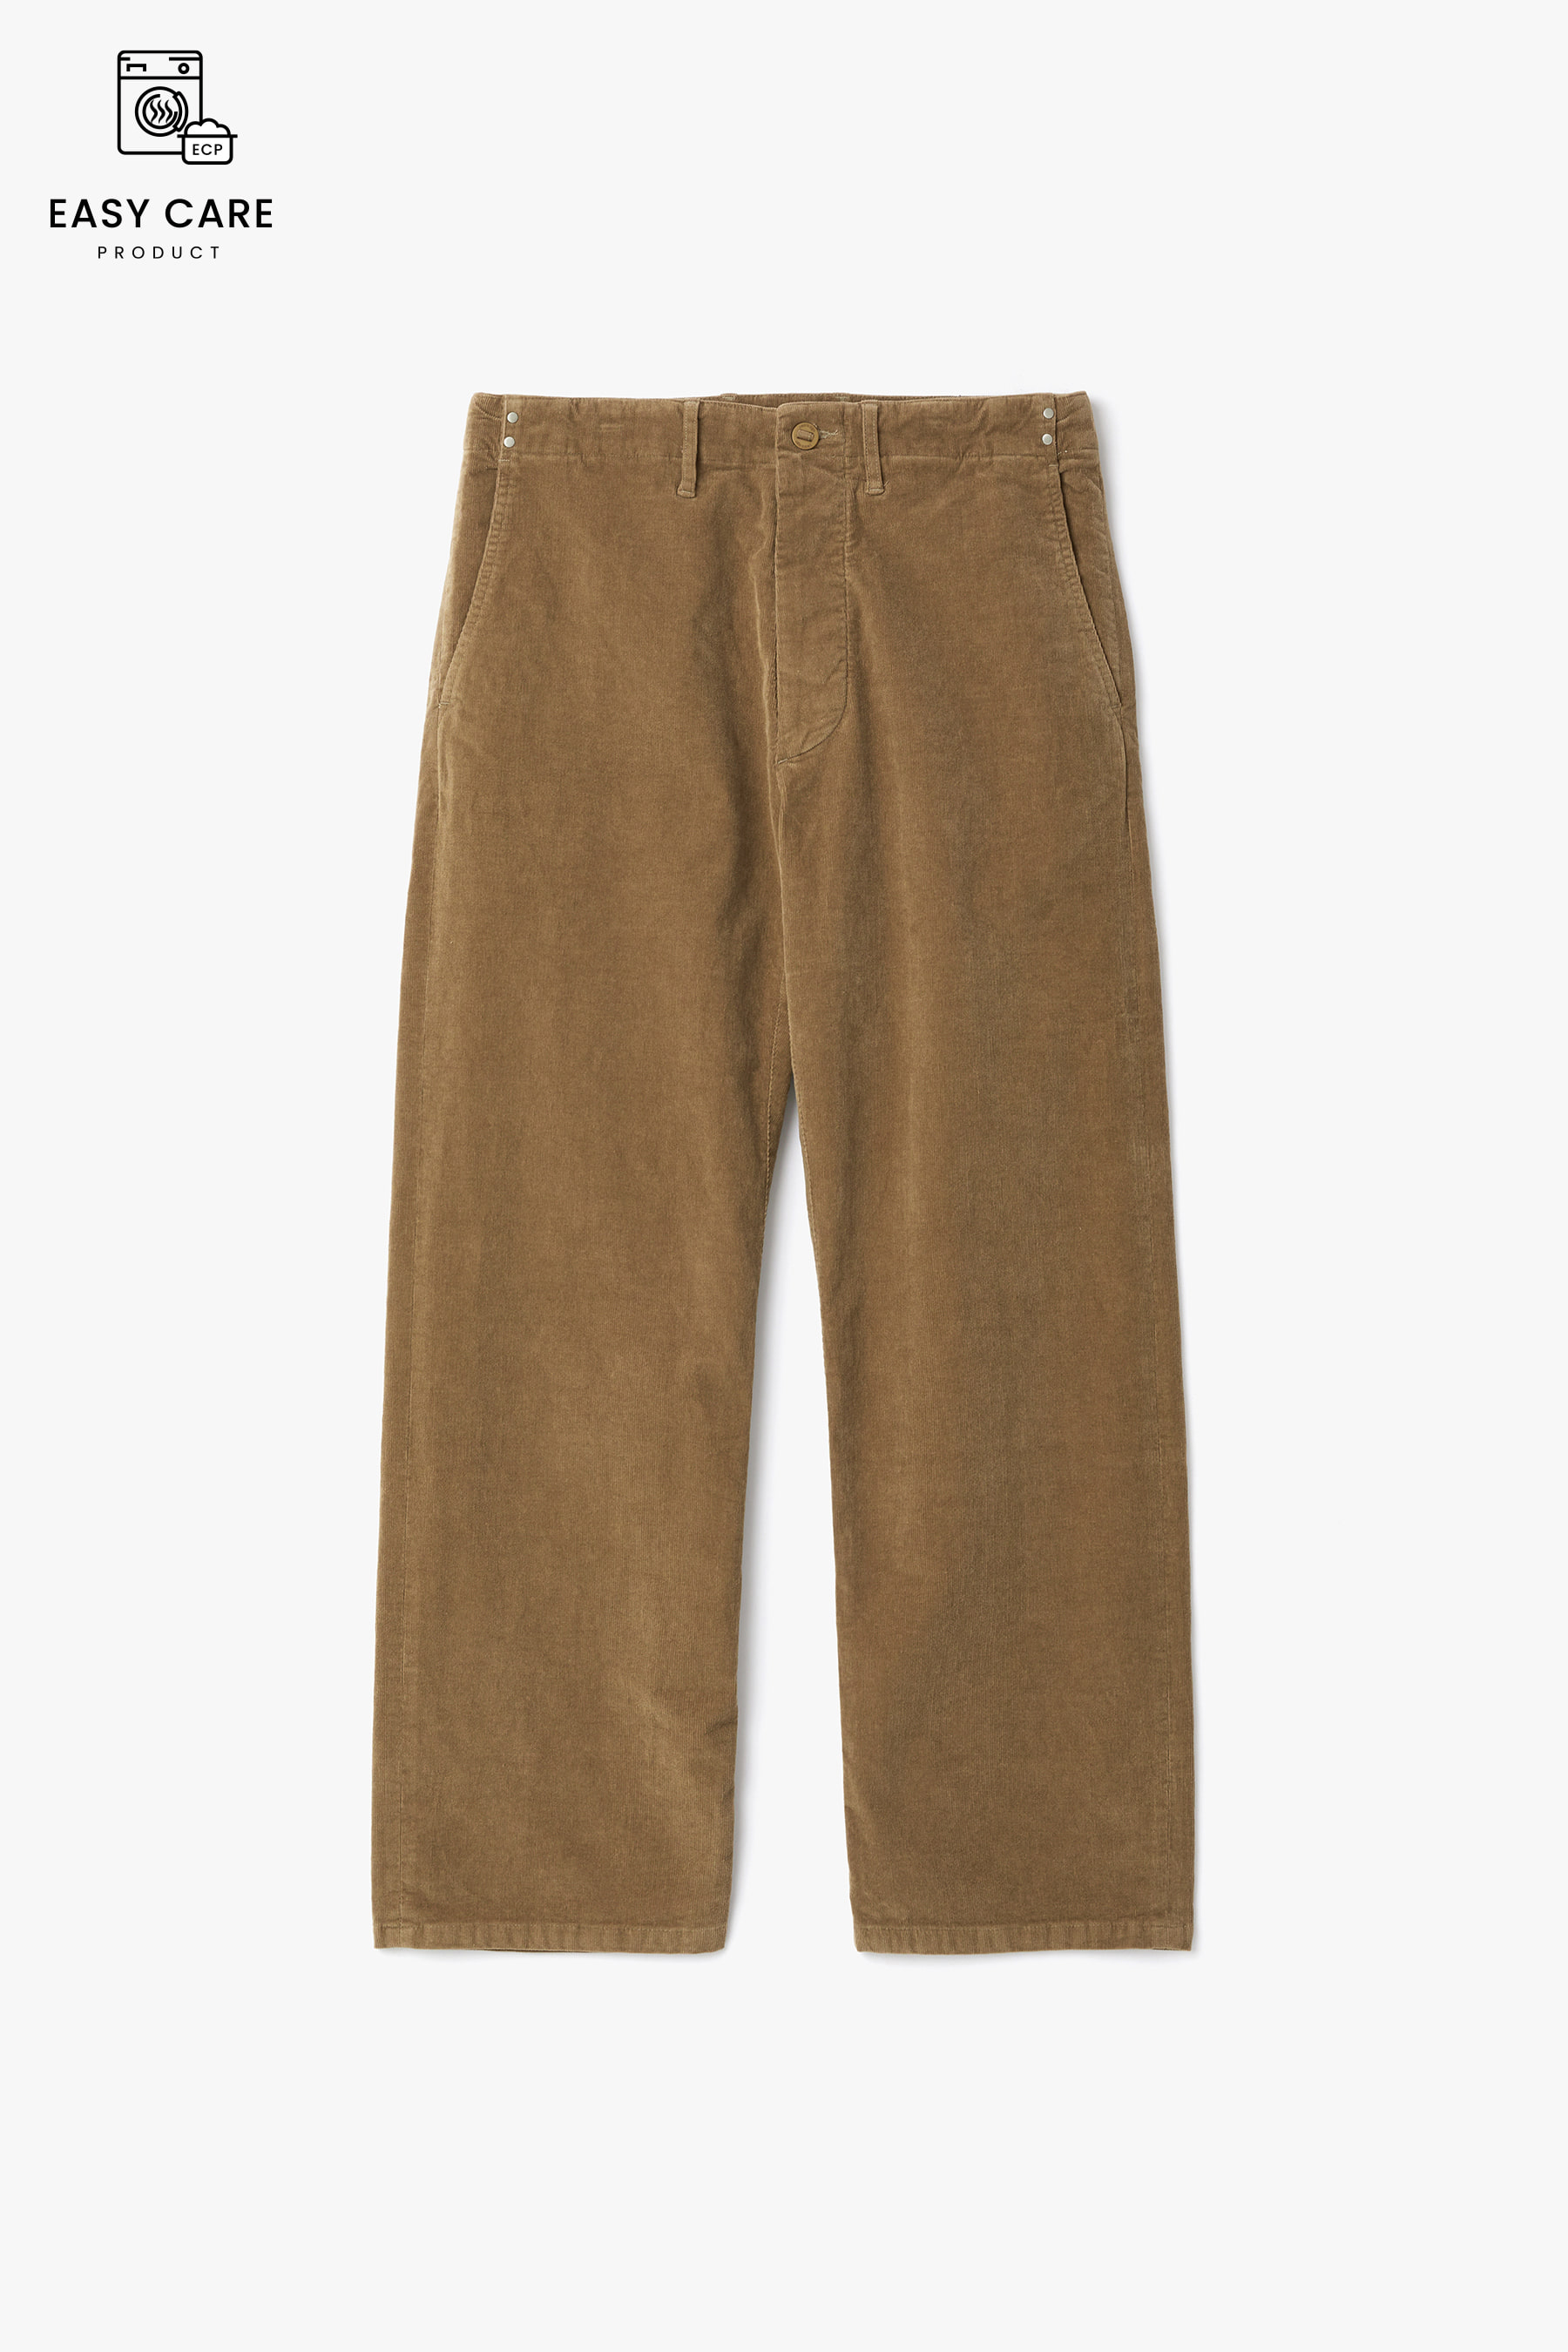 FRENCH BEIGE 21W WASHED CORDUROY WORK PANTS (ECP GARMENT PROCESS)